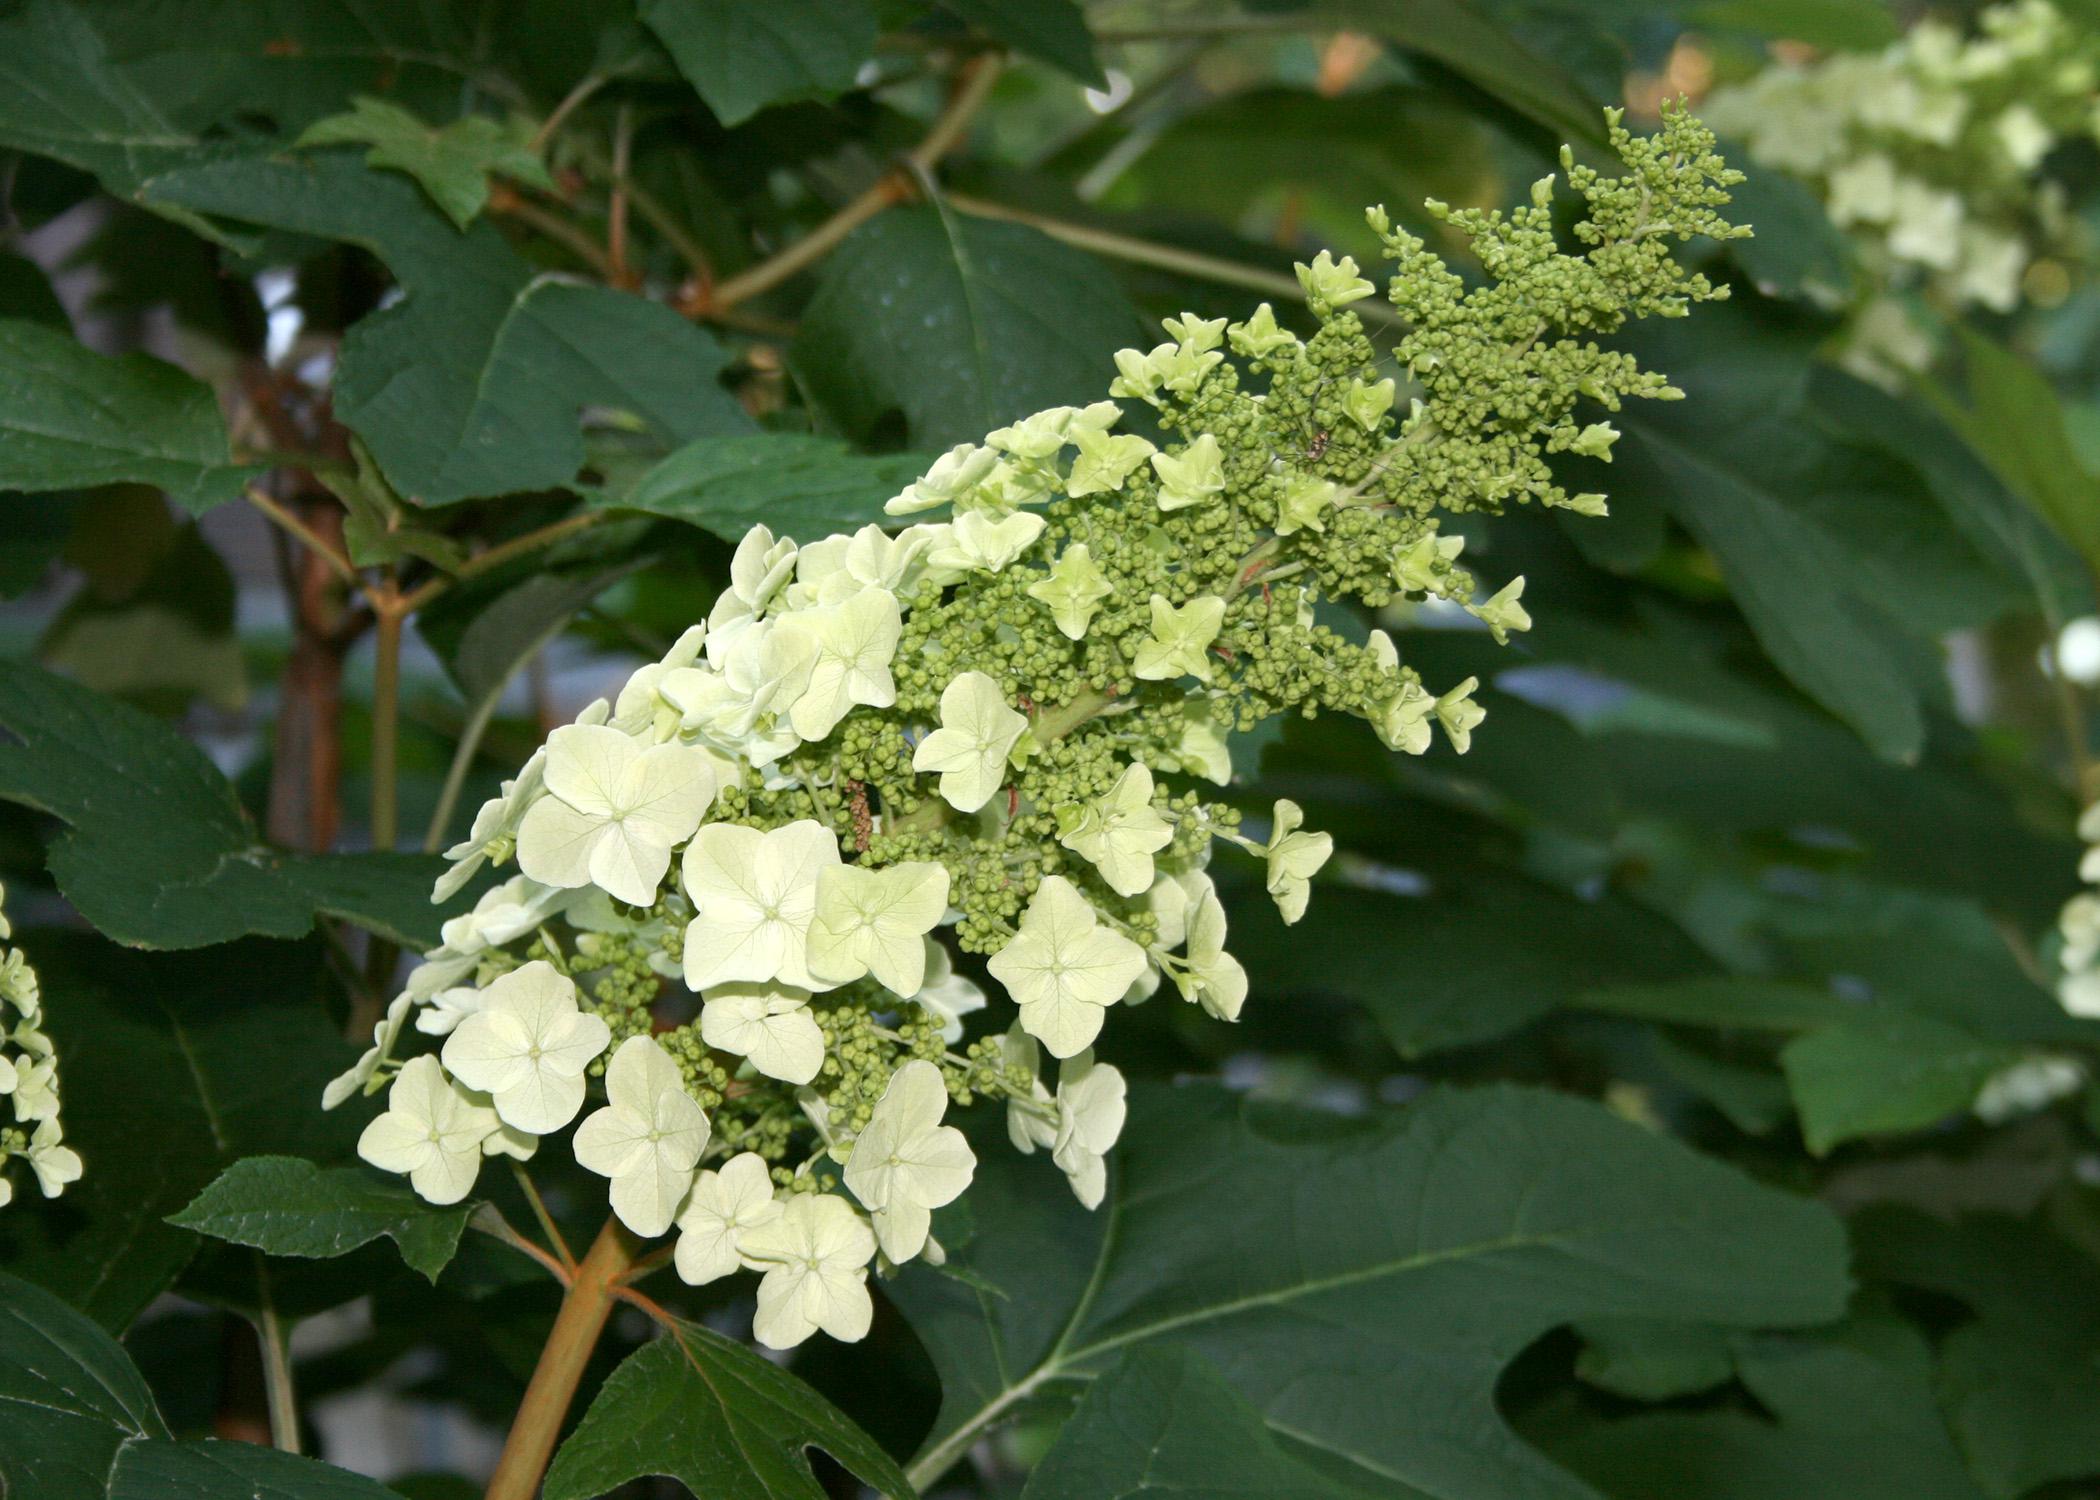 Oakleaf hydrangea flowers are clusters made up of smaller, individual flowers growing in a cone shape. They start white and transition to pink shades. (Photo by MSU Extension Service/Gary Bachman)